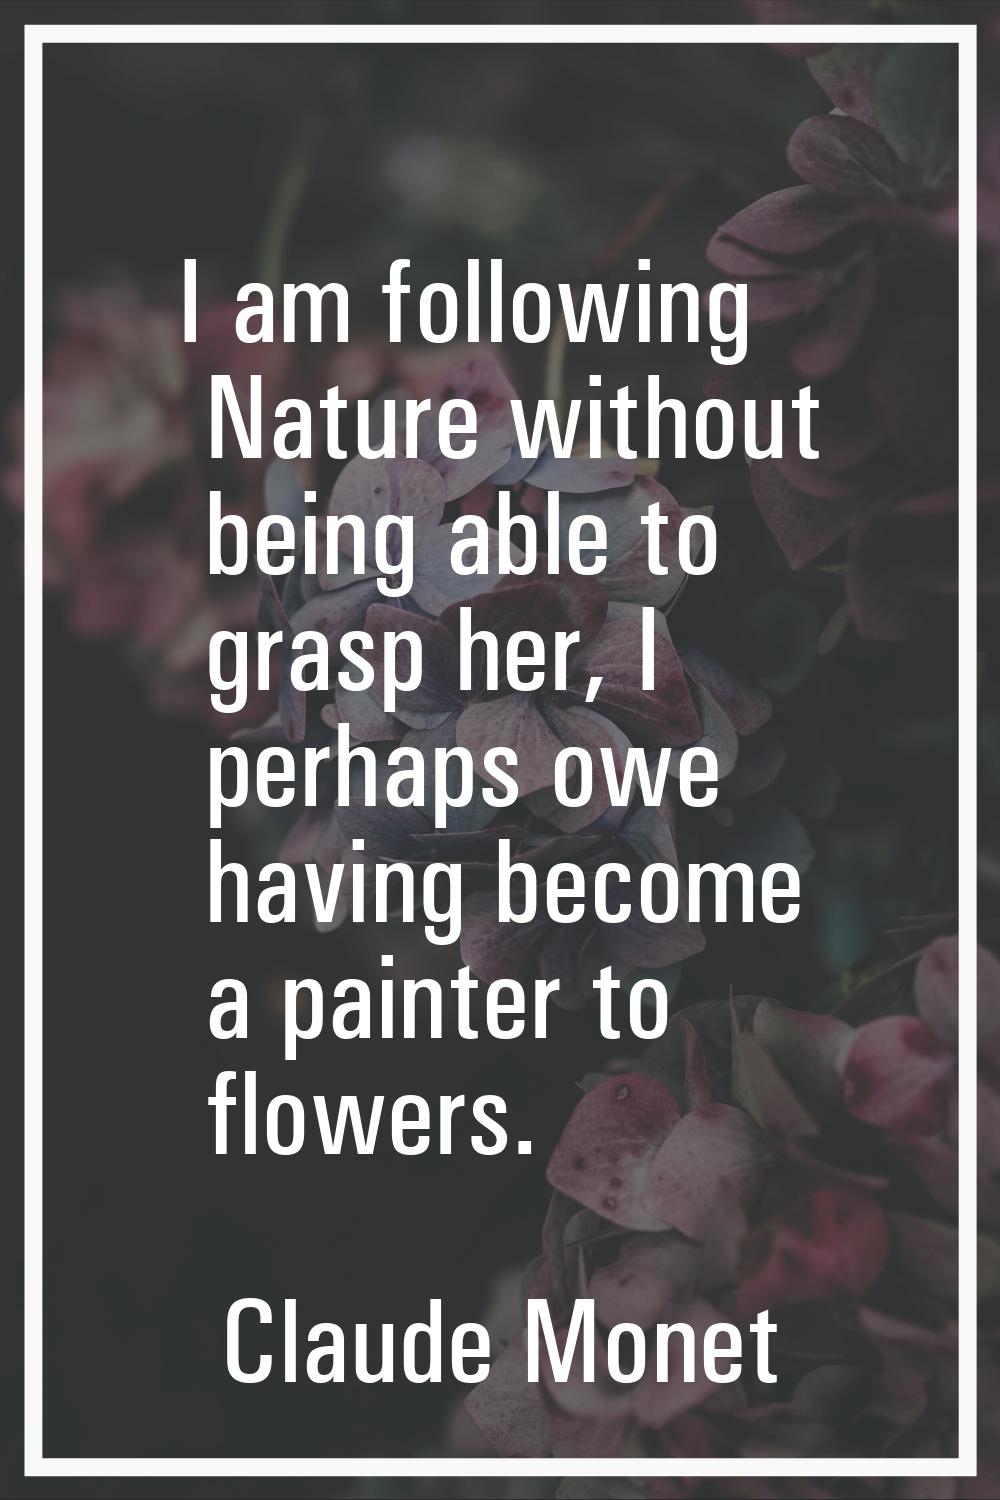 I am following Nature without being able to grasp her, I perhaps owe having become a painter to flo